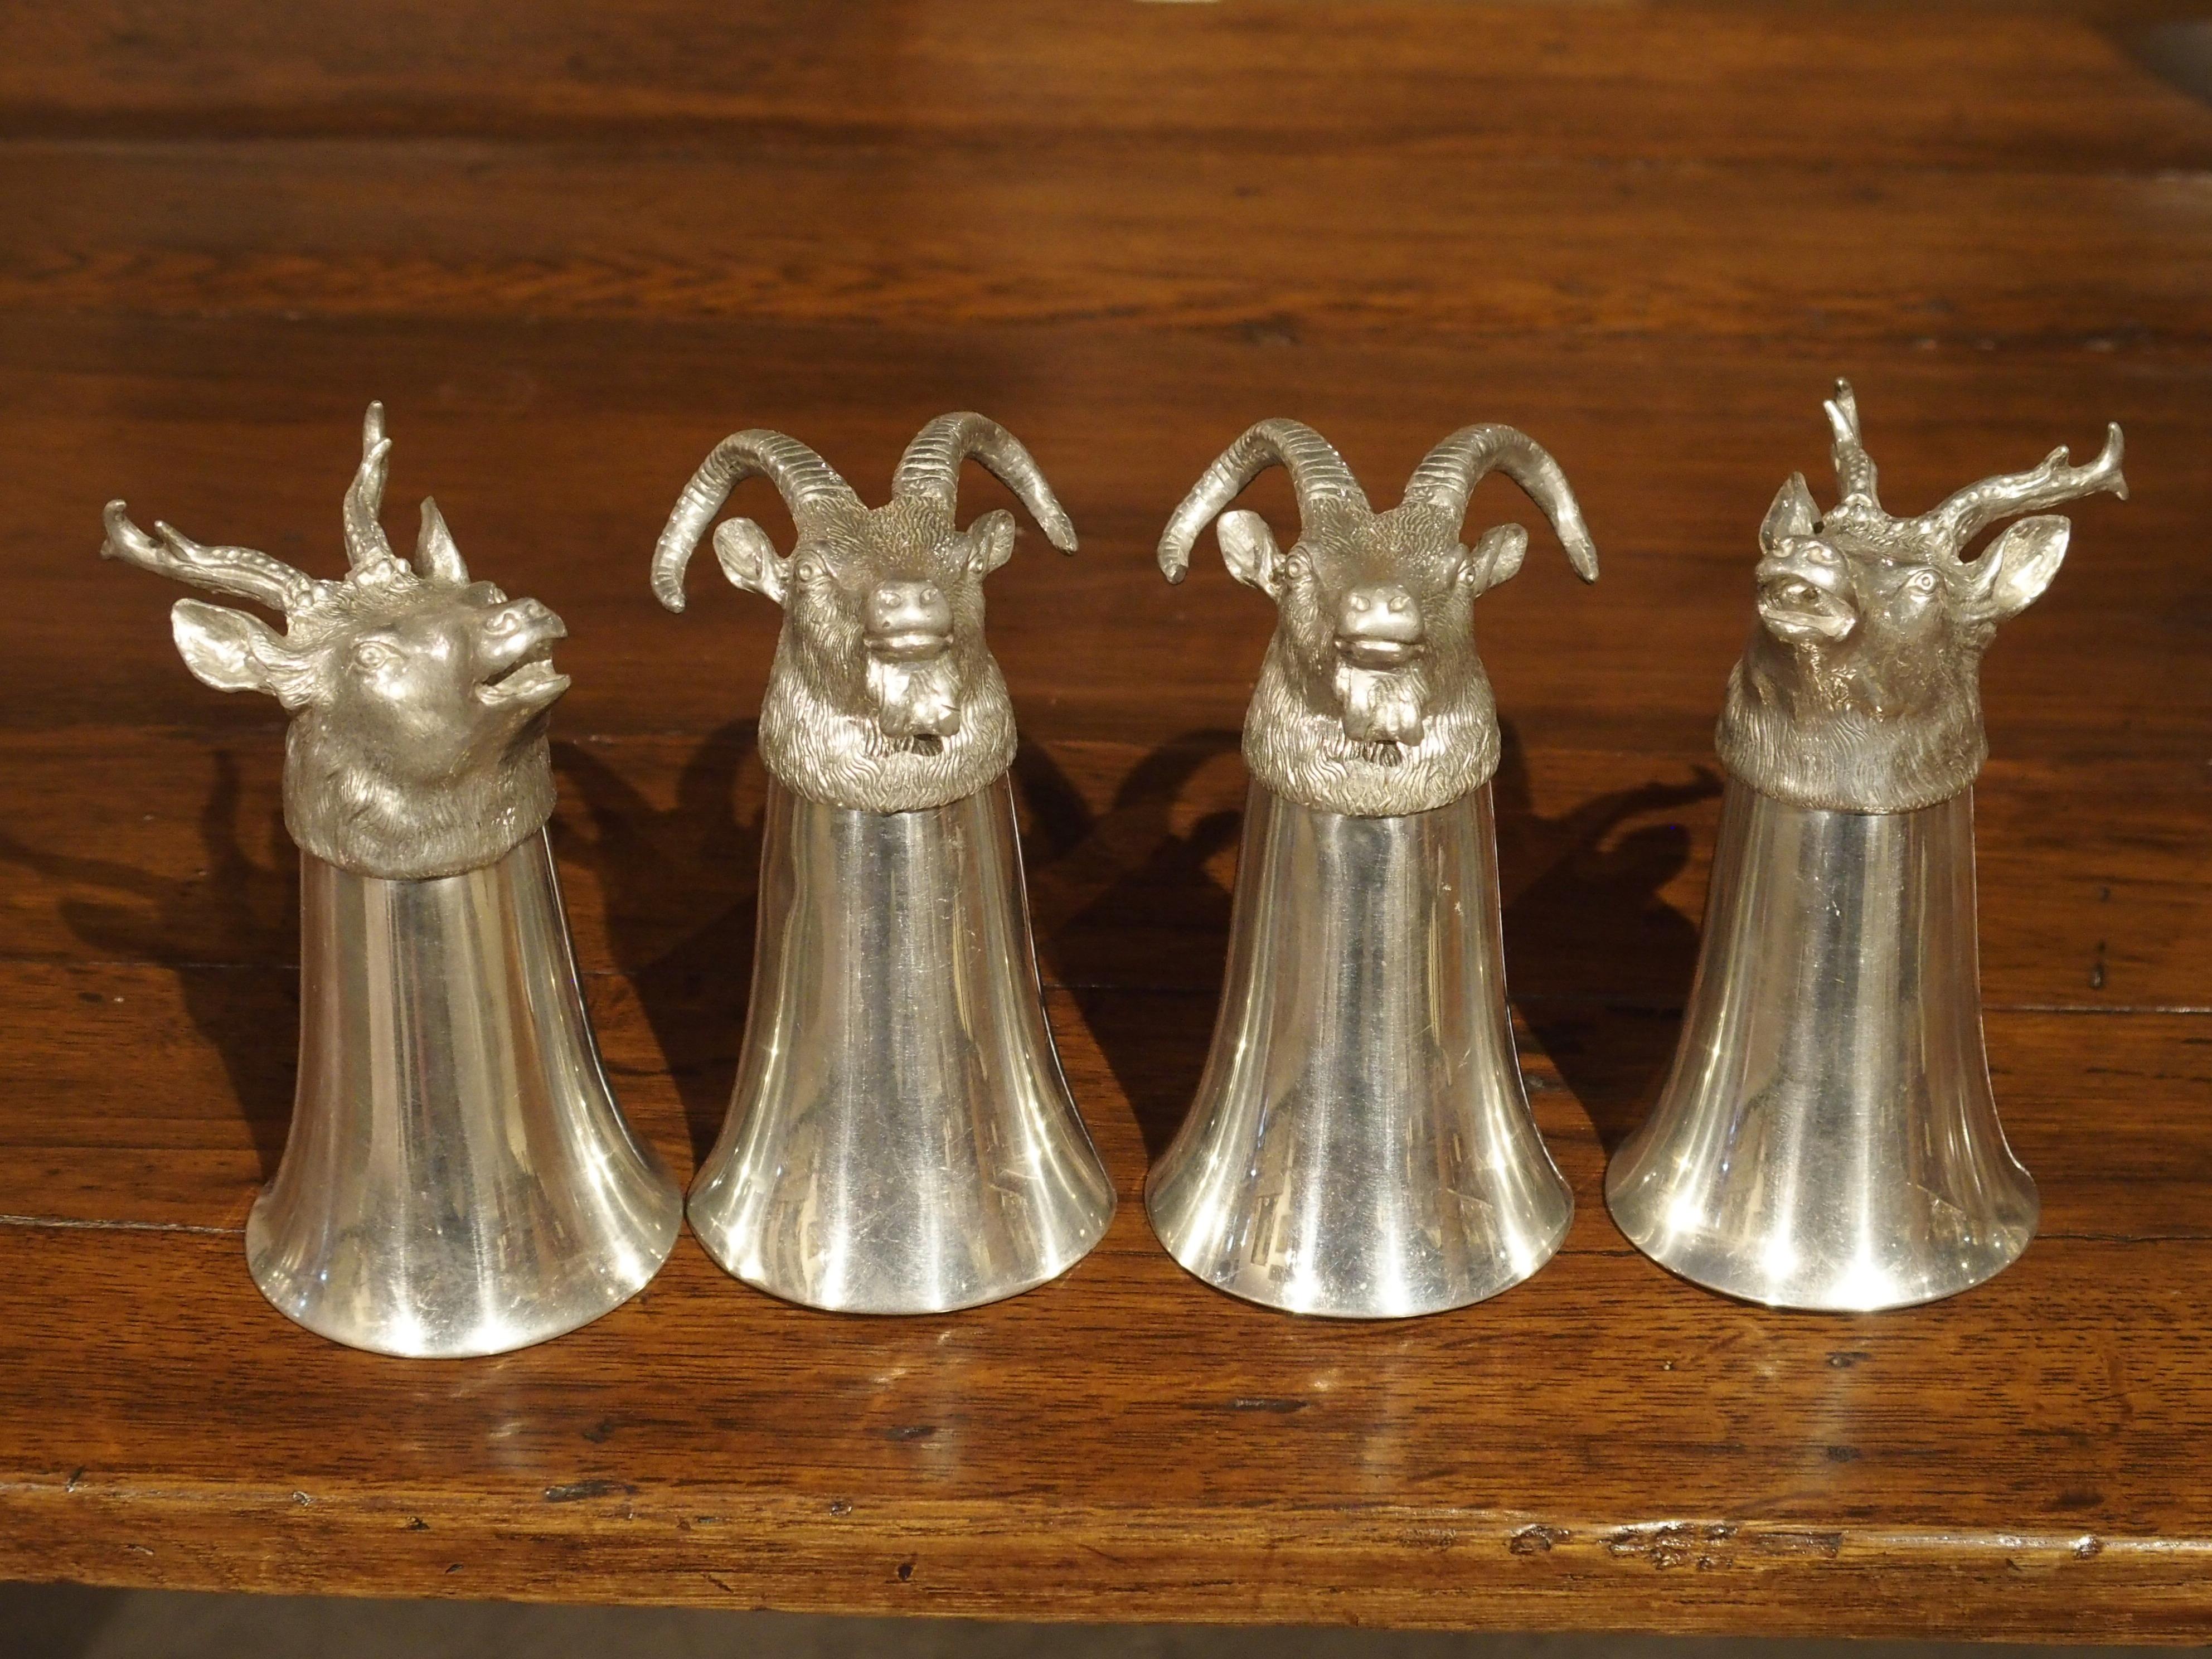 Set of 4 Polished Pewter Stag and Ibex Stirrup Cups with Ice Bucket 13